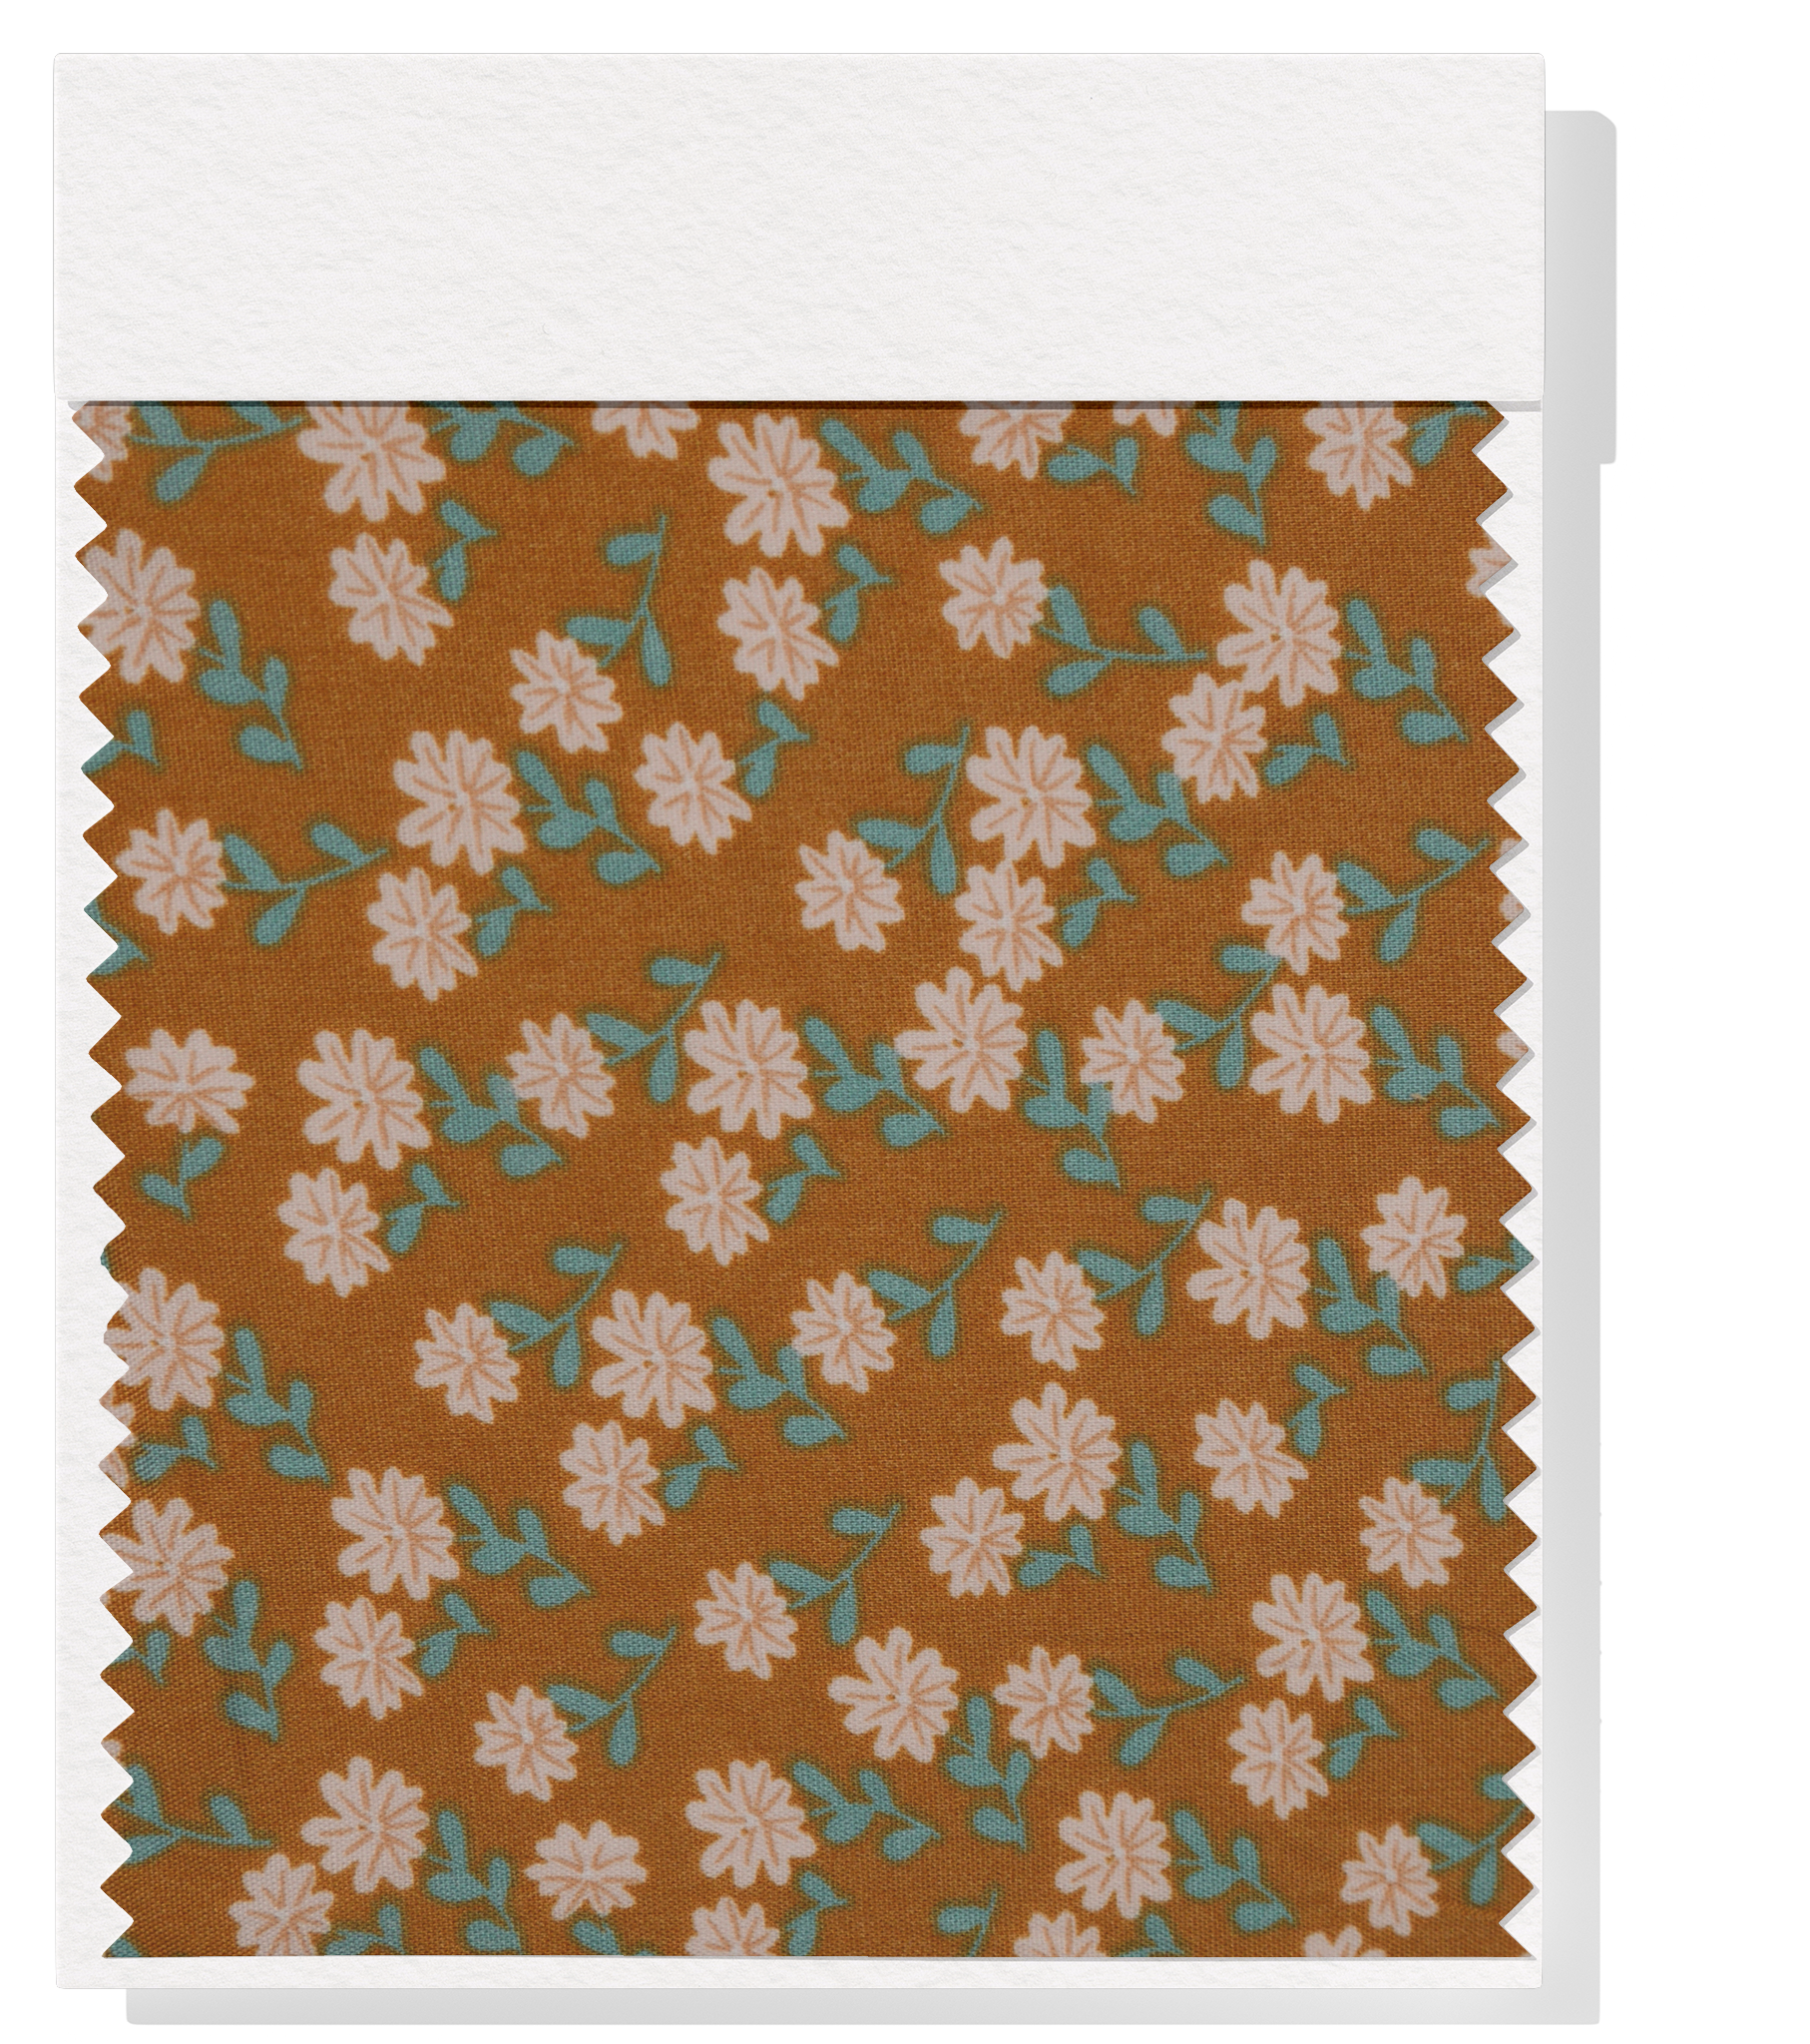 Printed Rayon $9.00p/m - Clementine (Toffee)